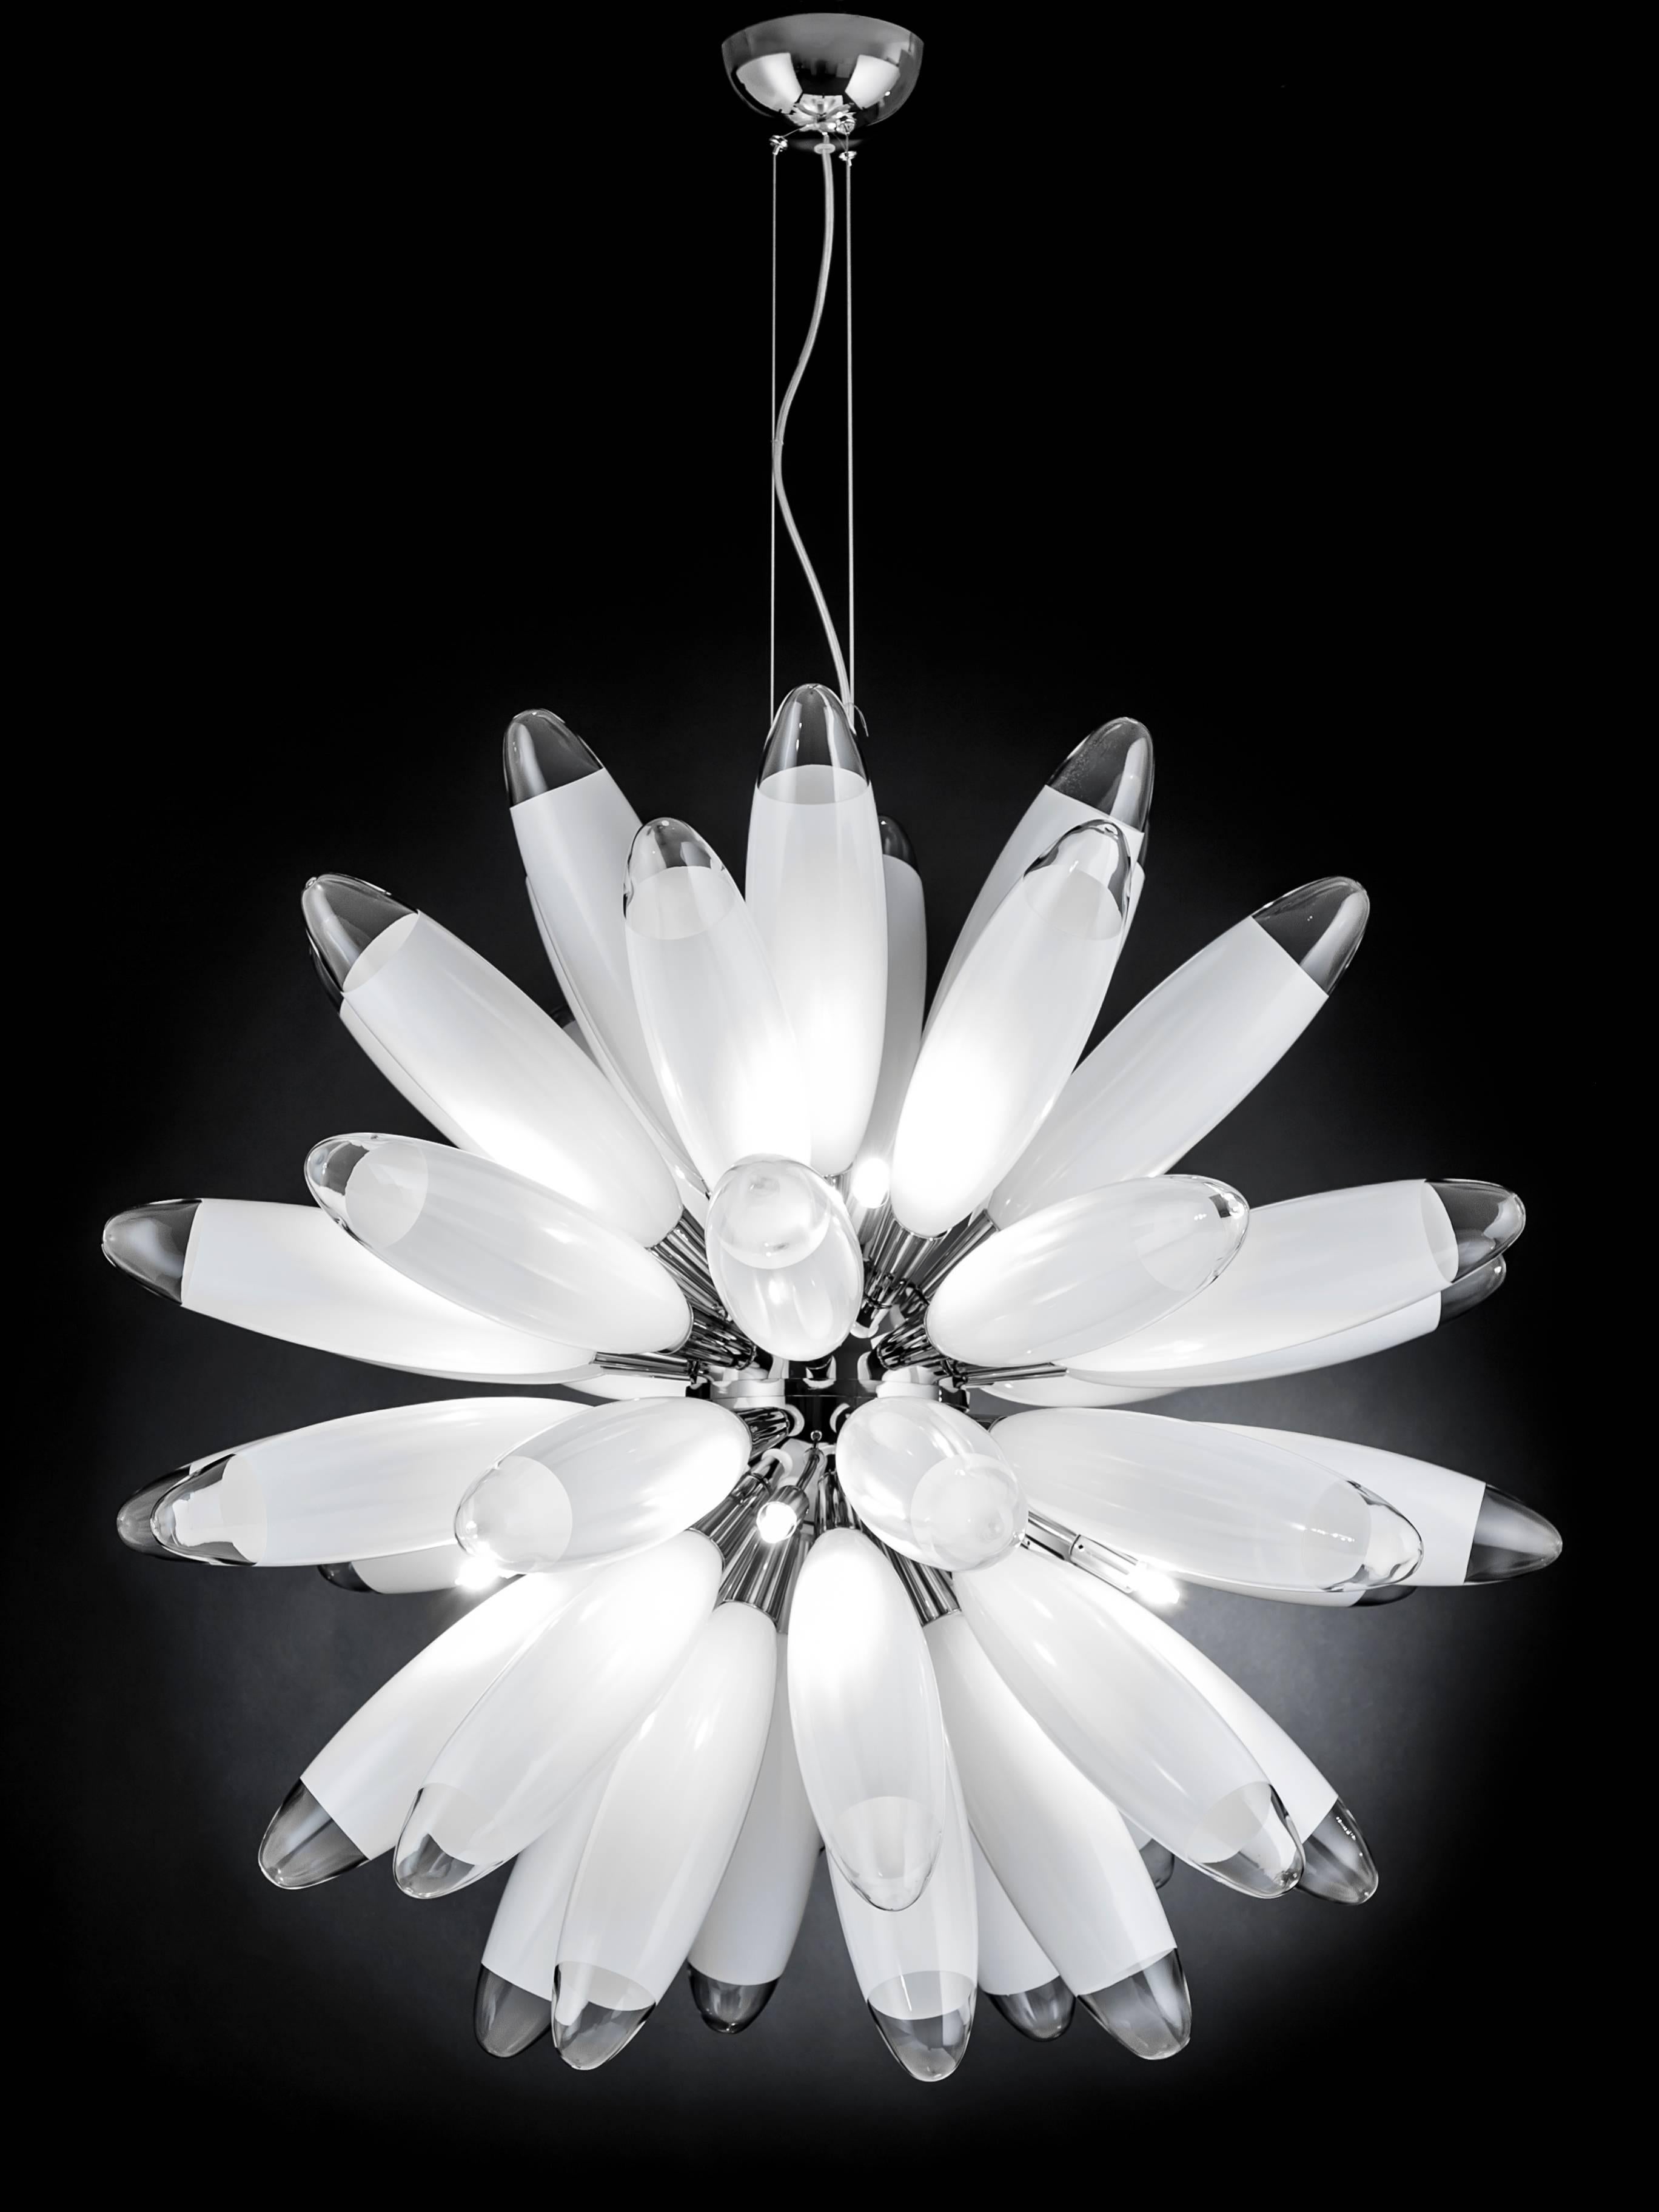 Italian torpedo sputnik chandelier with 48 white blown glasses, mounted on chrome finish metal frame / Designed by Fabio Bergomi for Fabio Ltd / Made in Italy
10 lights / G9 type / max 40W each 
Height: 33.5 inches plus adjustable steel cables and